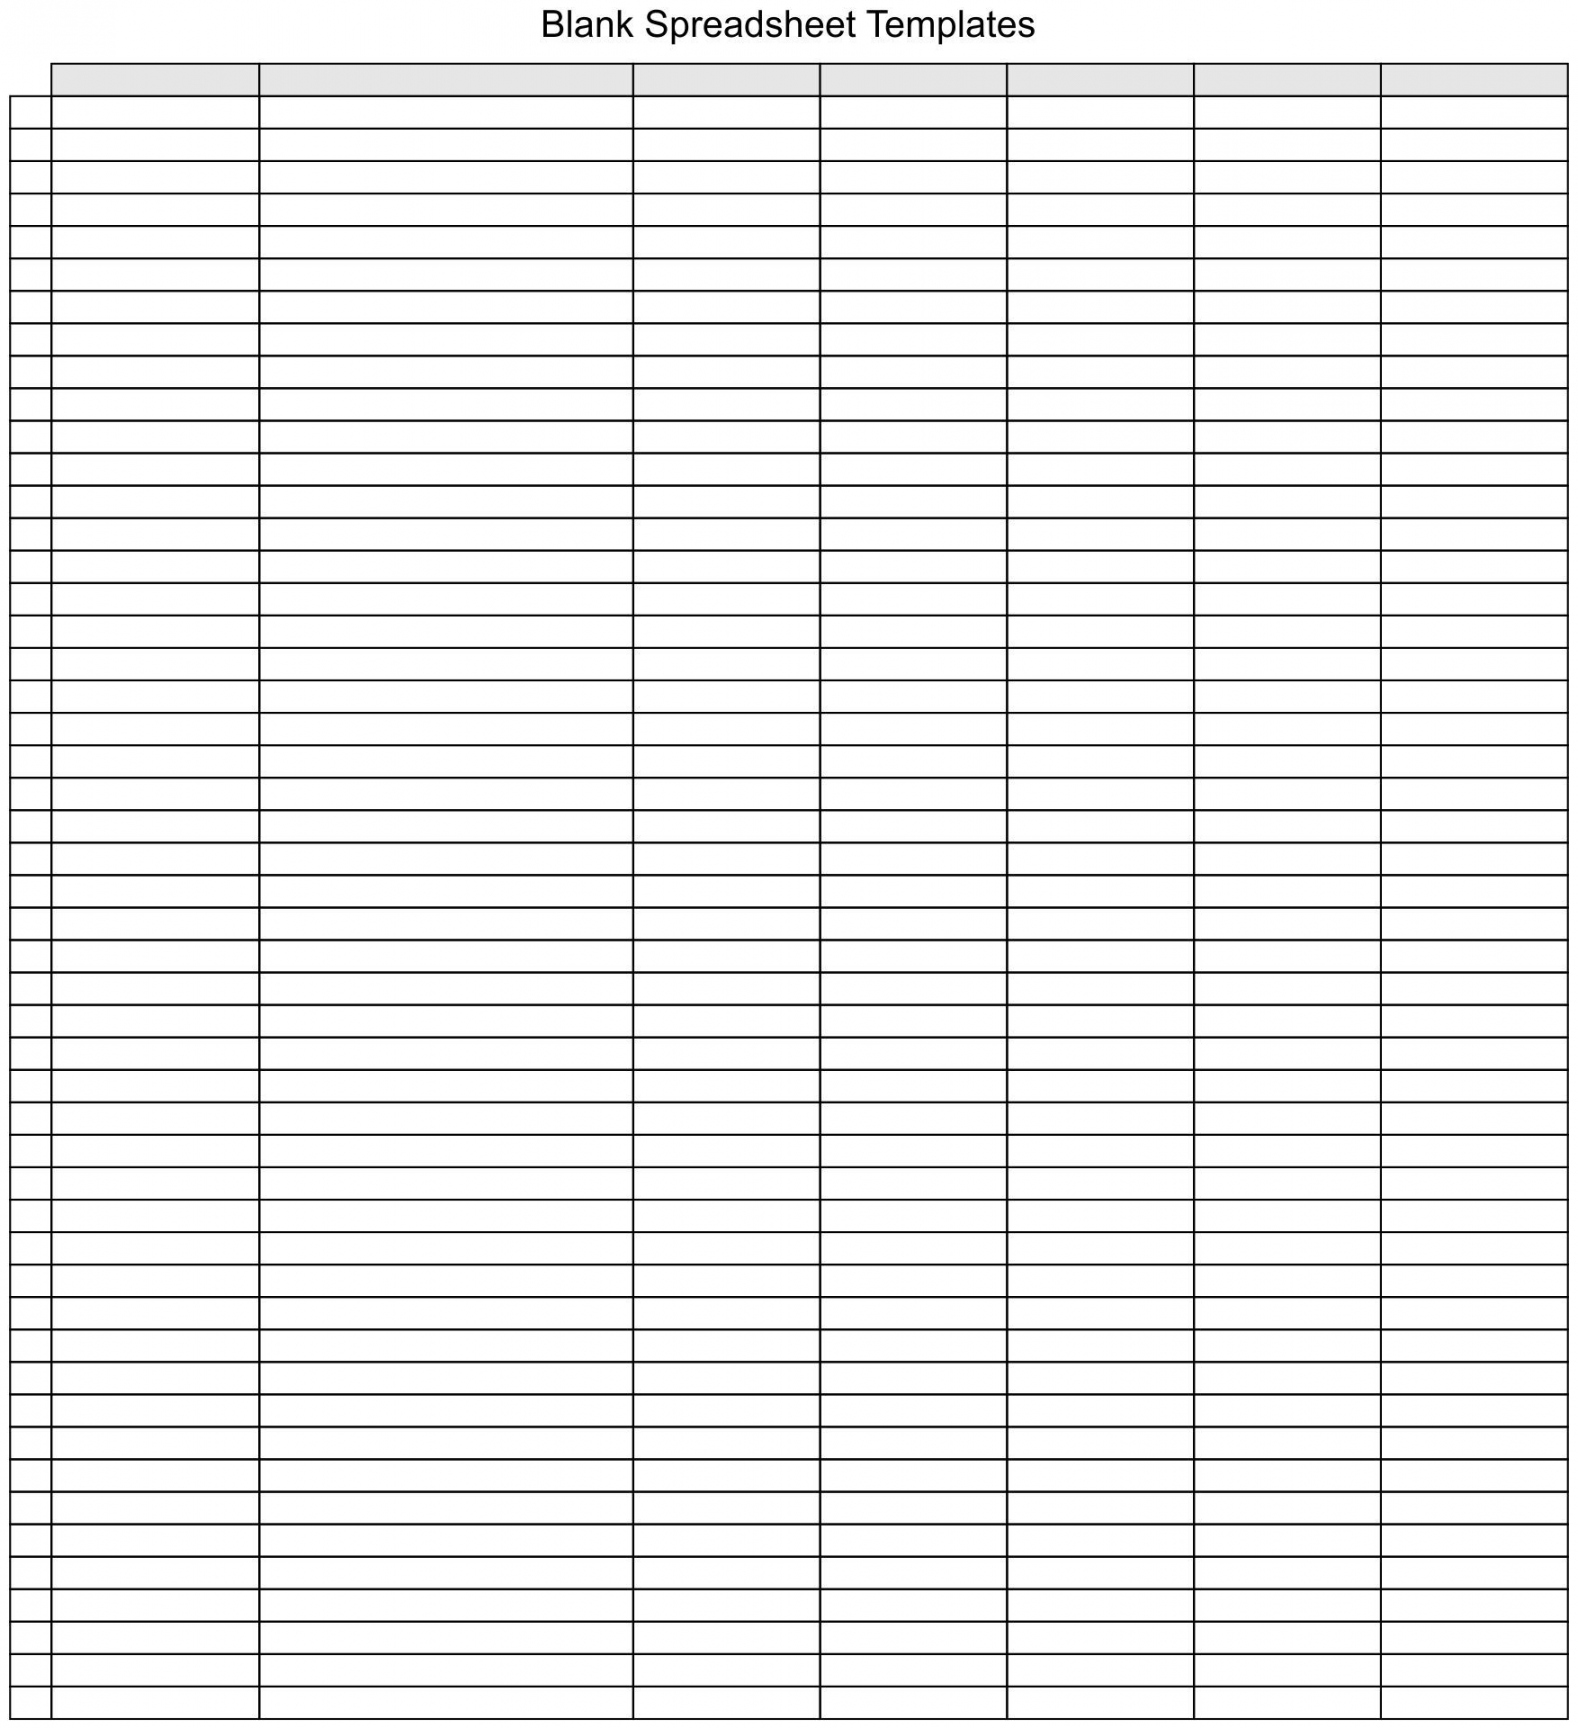 Best Free Printable Spreadsheets Templates - printablee - Printable Blank Spreadsheet